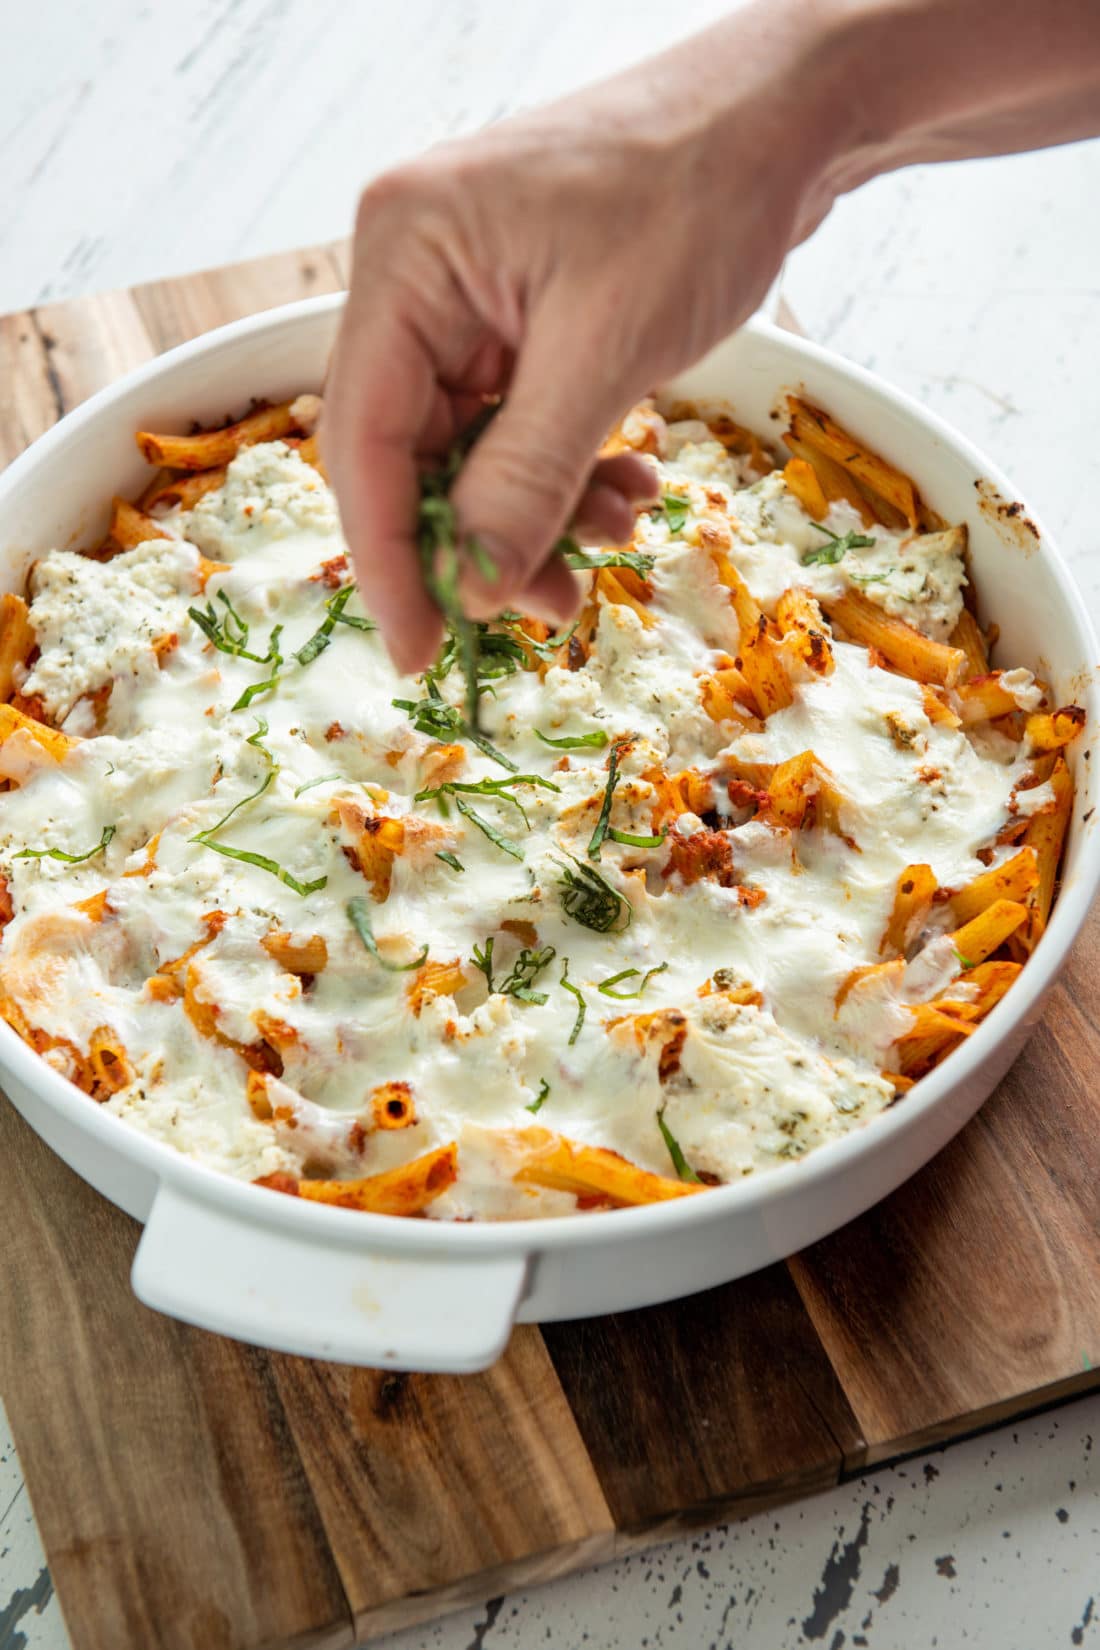 Simple Baked Pasta with Bolognese Sauce / Katie Workman / themom100.com / Photo by Cheyenne Cohen